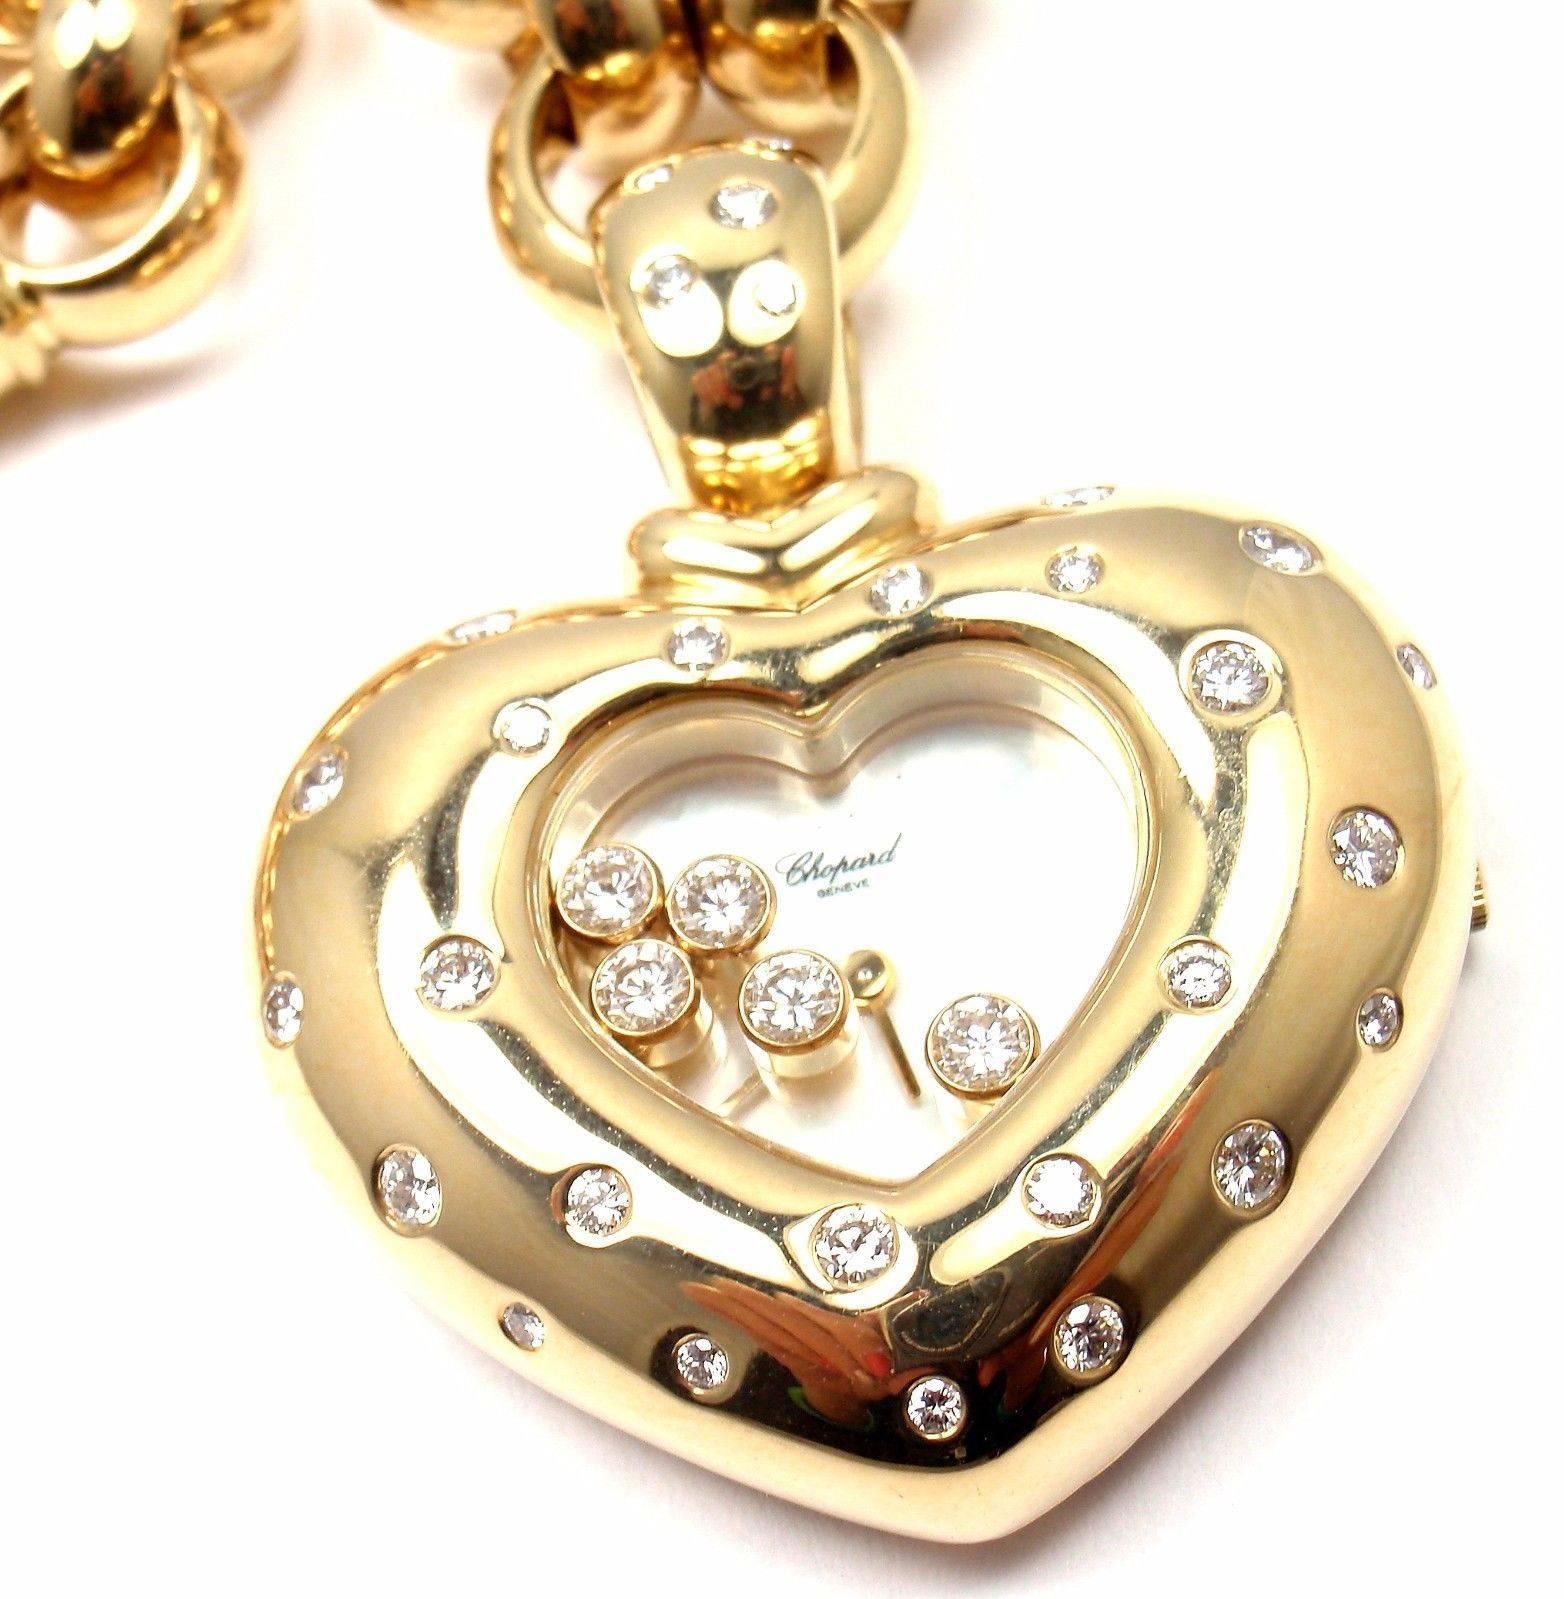 18k Yellow Gold Diamond Happy Diamonds Heart Shape Watch Pendant Necklace by Chopard.  
With 34 Round Brilliant Cut Diamonds = VVS1 clarity, E color total weight approx. 2ct

Details:  
Length: 32